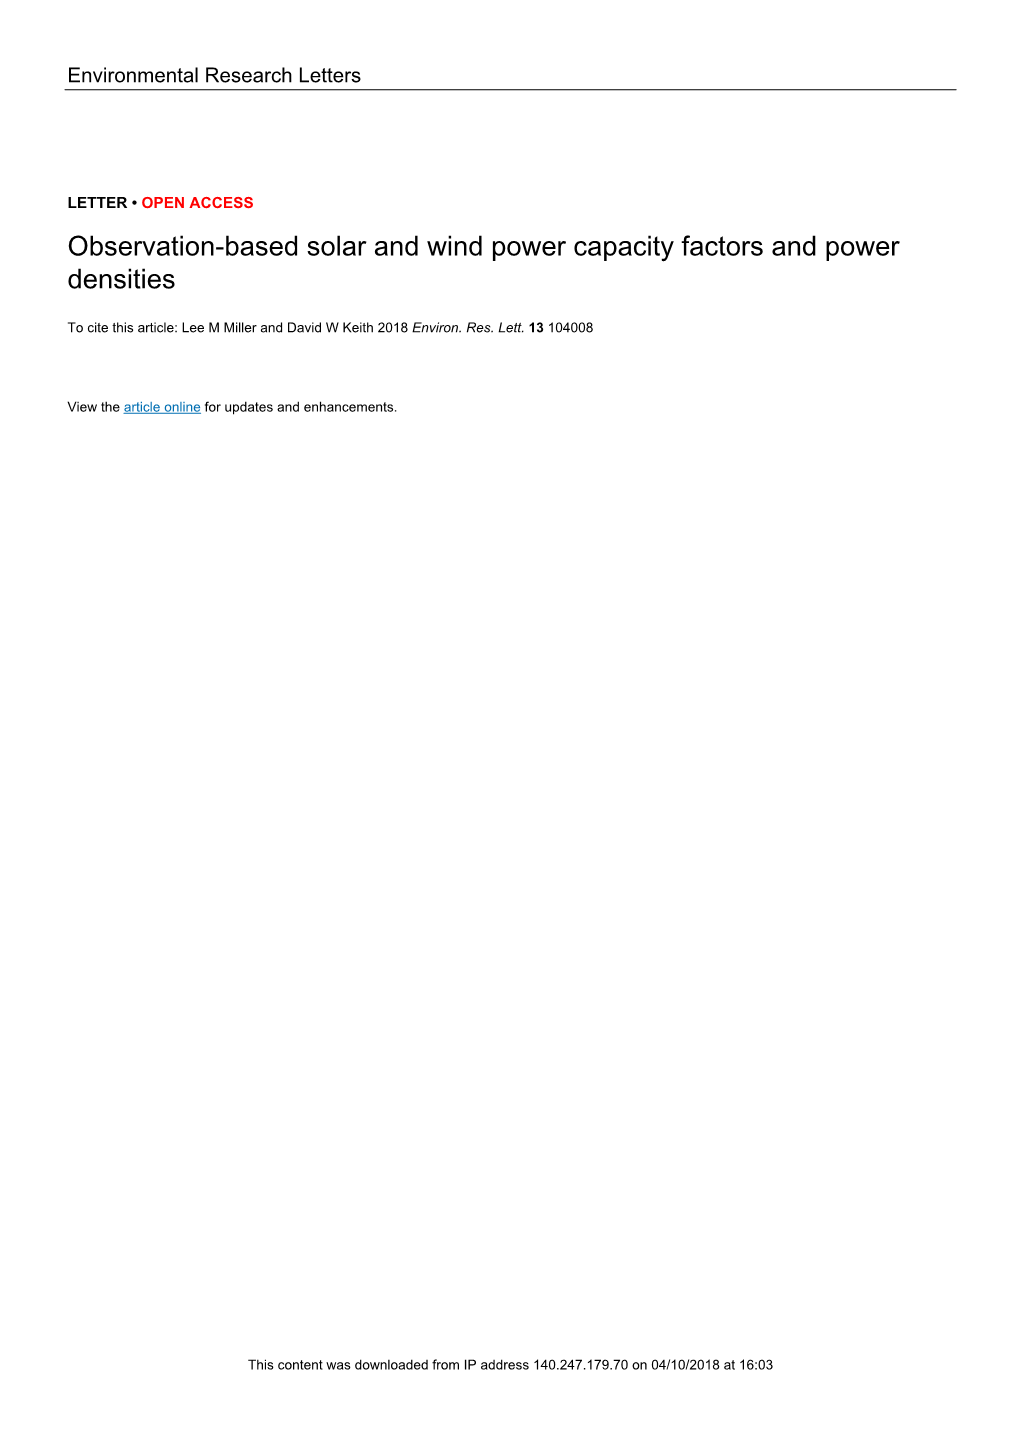 Observation-Based Solar and Wind Power Capacity Factors and Power Densities